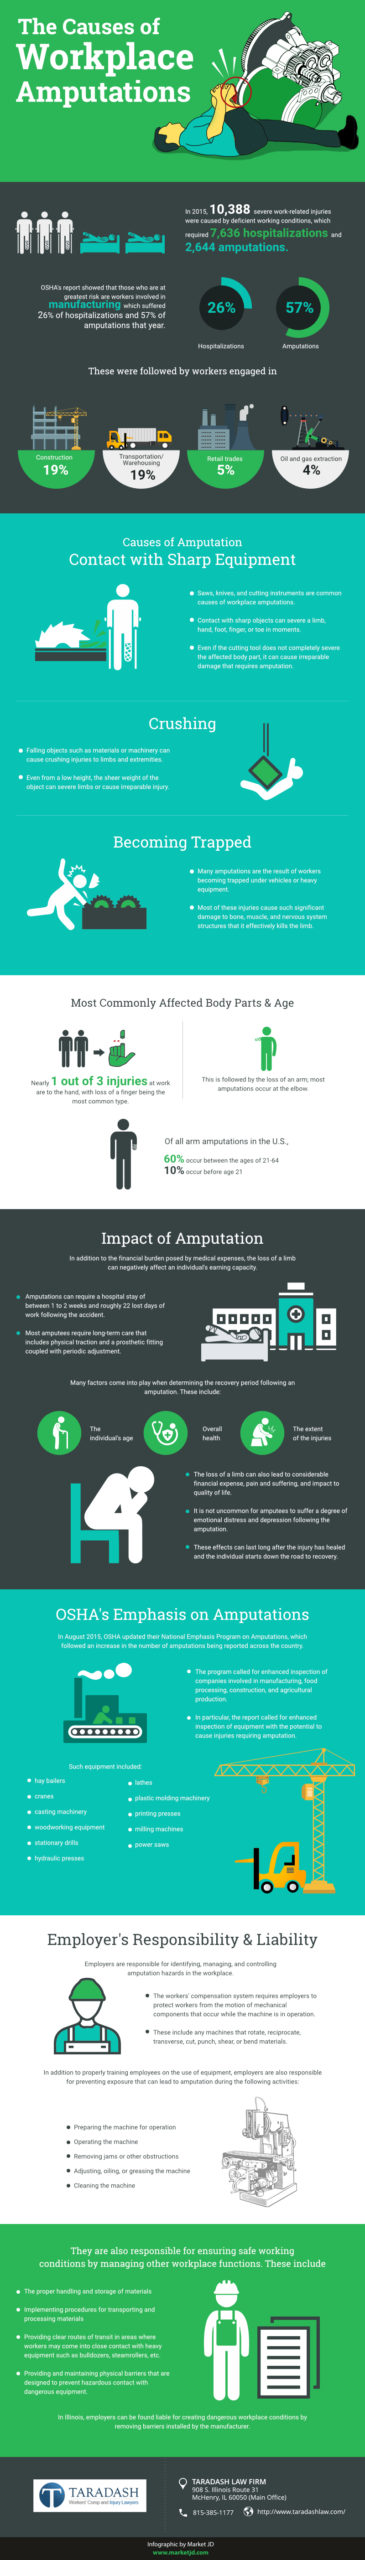 Infographic_The Causes of Workplace Amputations